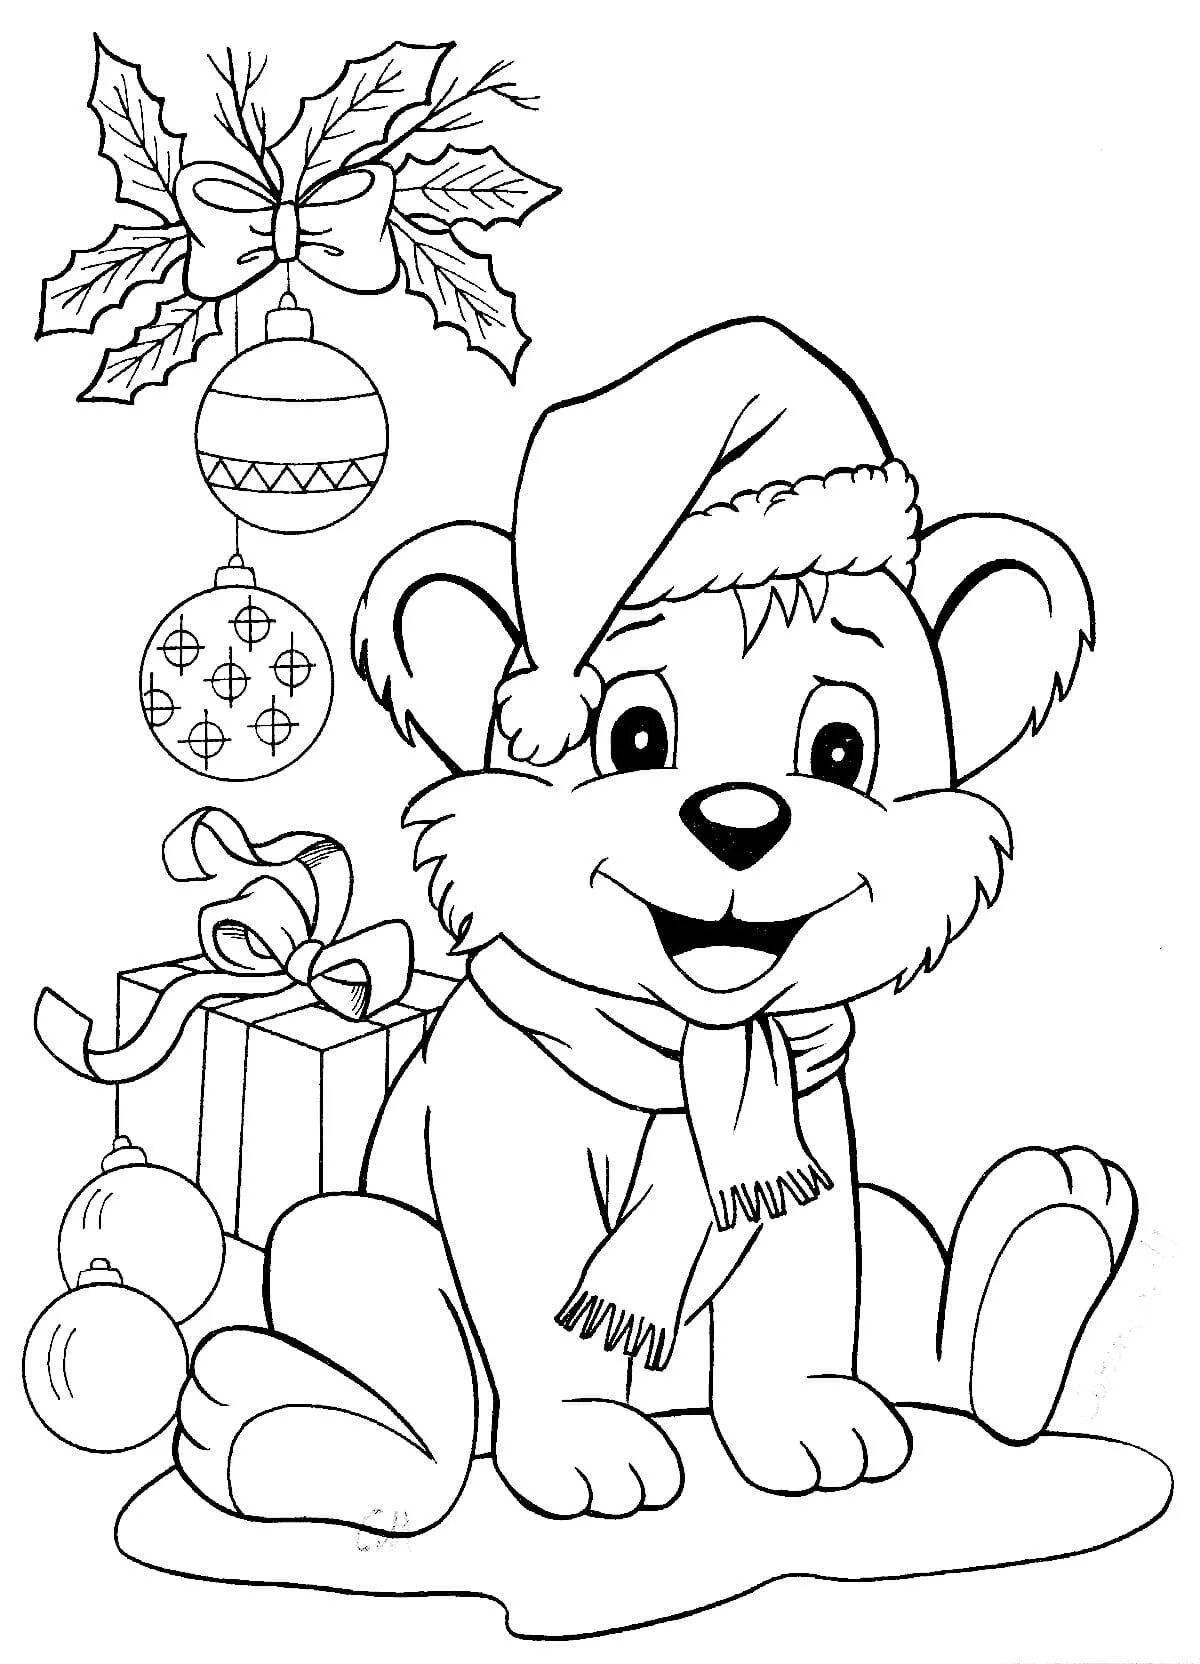 Bright Christmas drawing for children